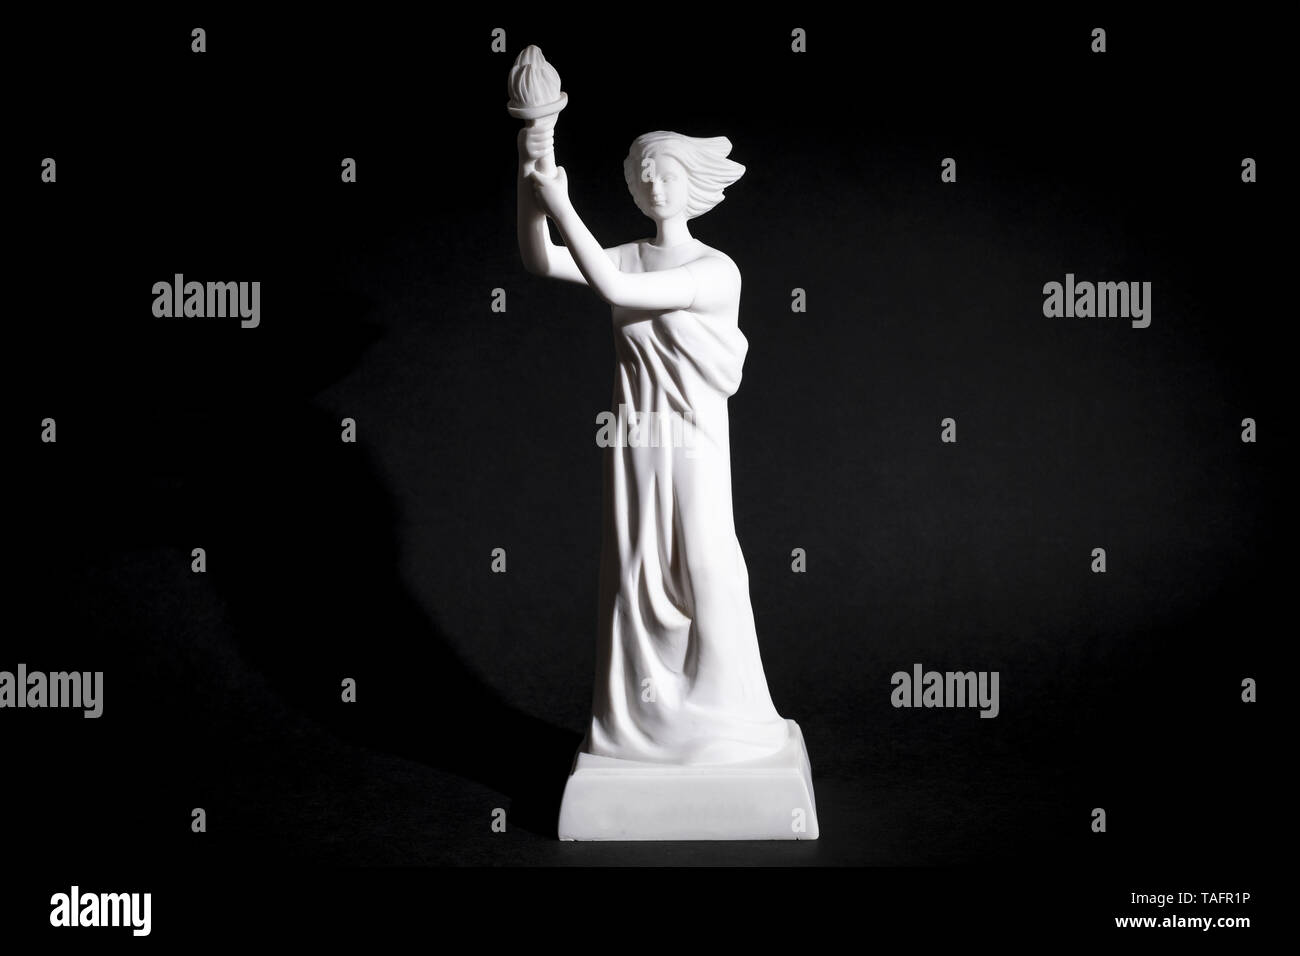 May 25, 2019 - Hong Kong, China - A view of a statue of Goddess of Democracy, also known as Goddess of Liberty in Hong Kong..The Statues was created during the Tiananmen Square protests of 1989 by the students. (Credit Image: © Chan Long Hei/SOPA Images via ZUMA Wire) Stock Photo